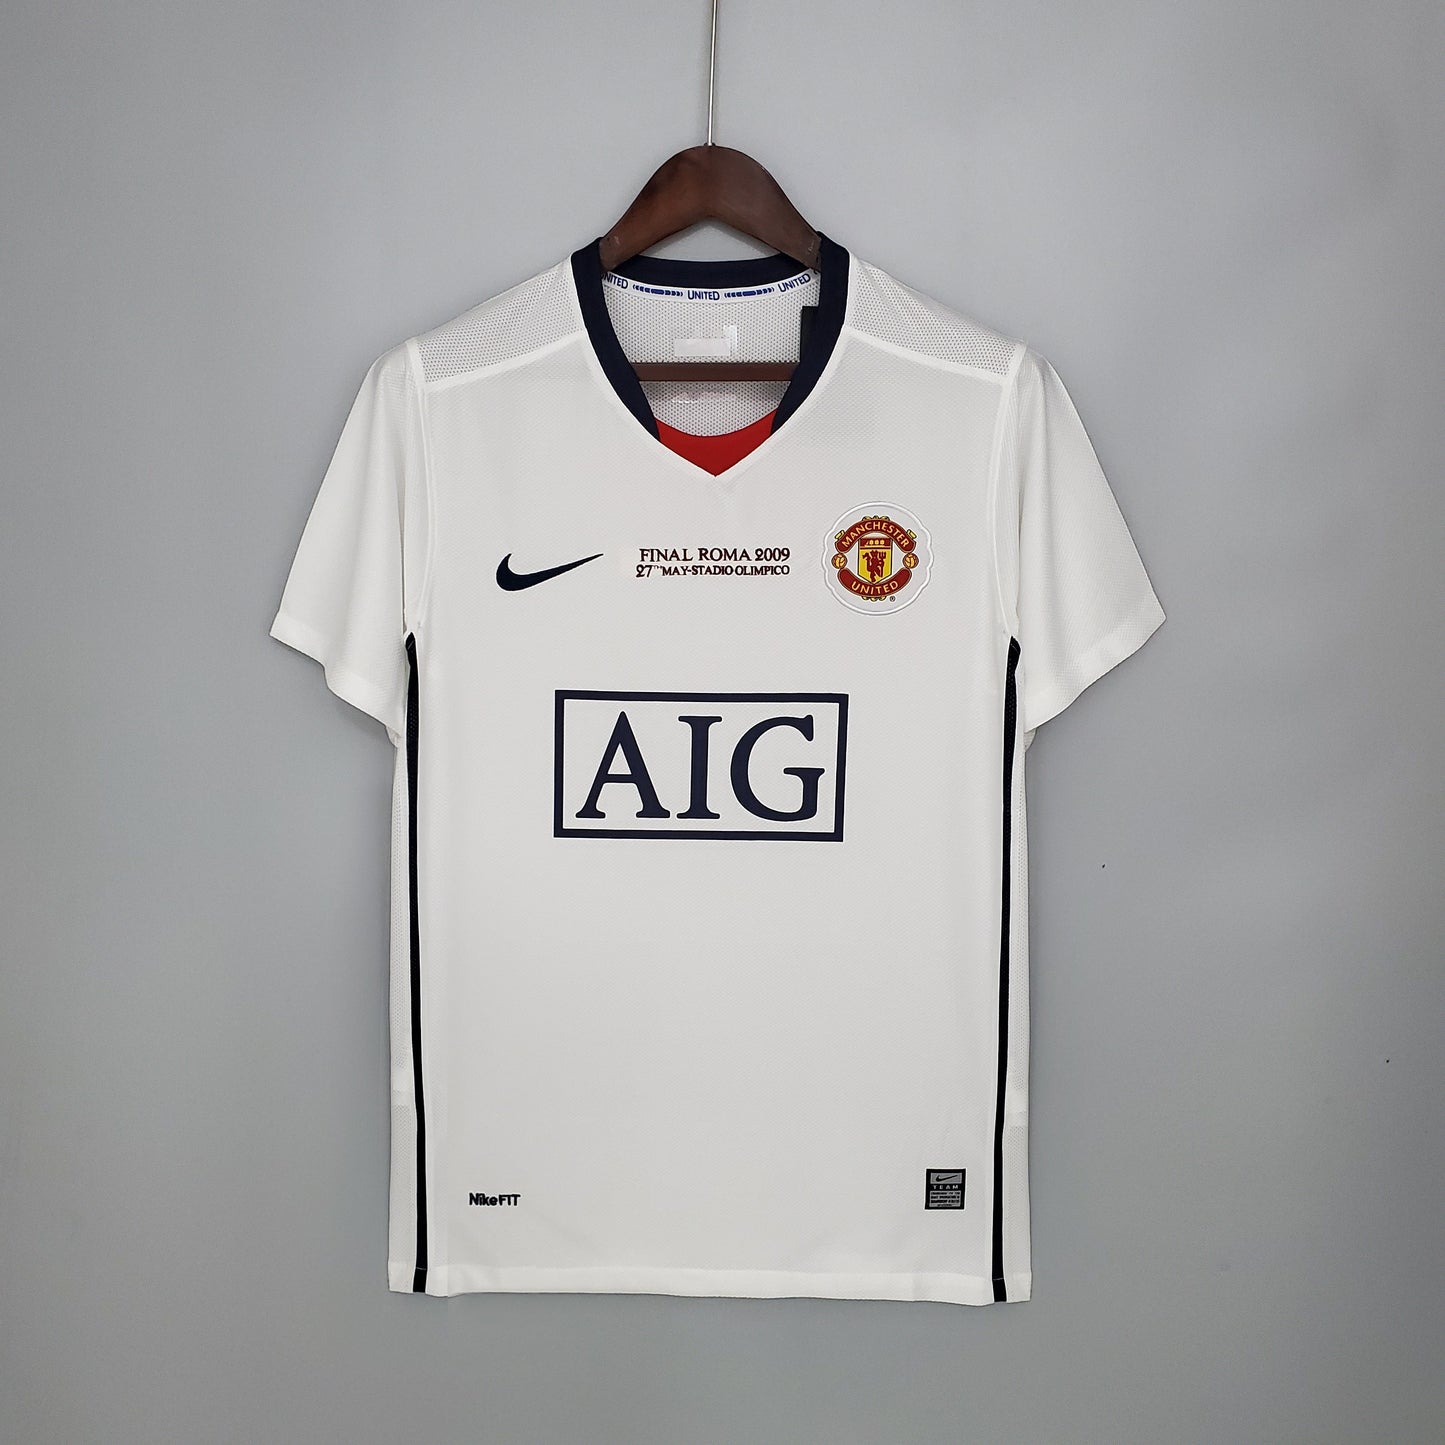 Retro Manchester United Champions League Away Kit 08/09